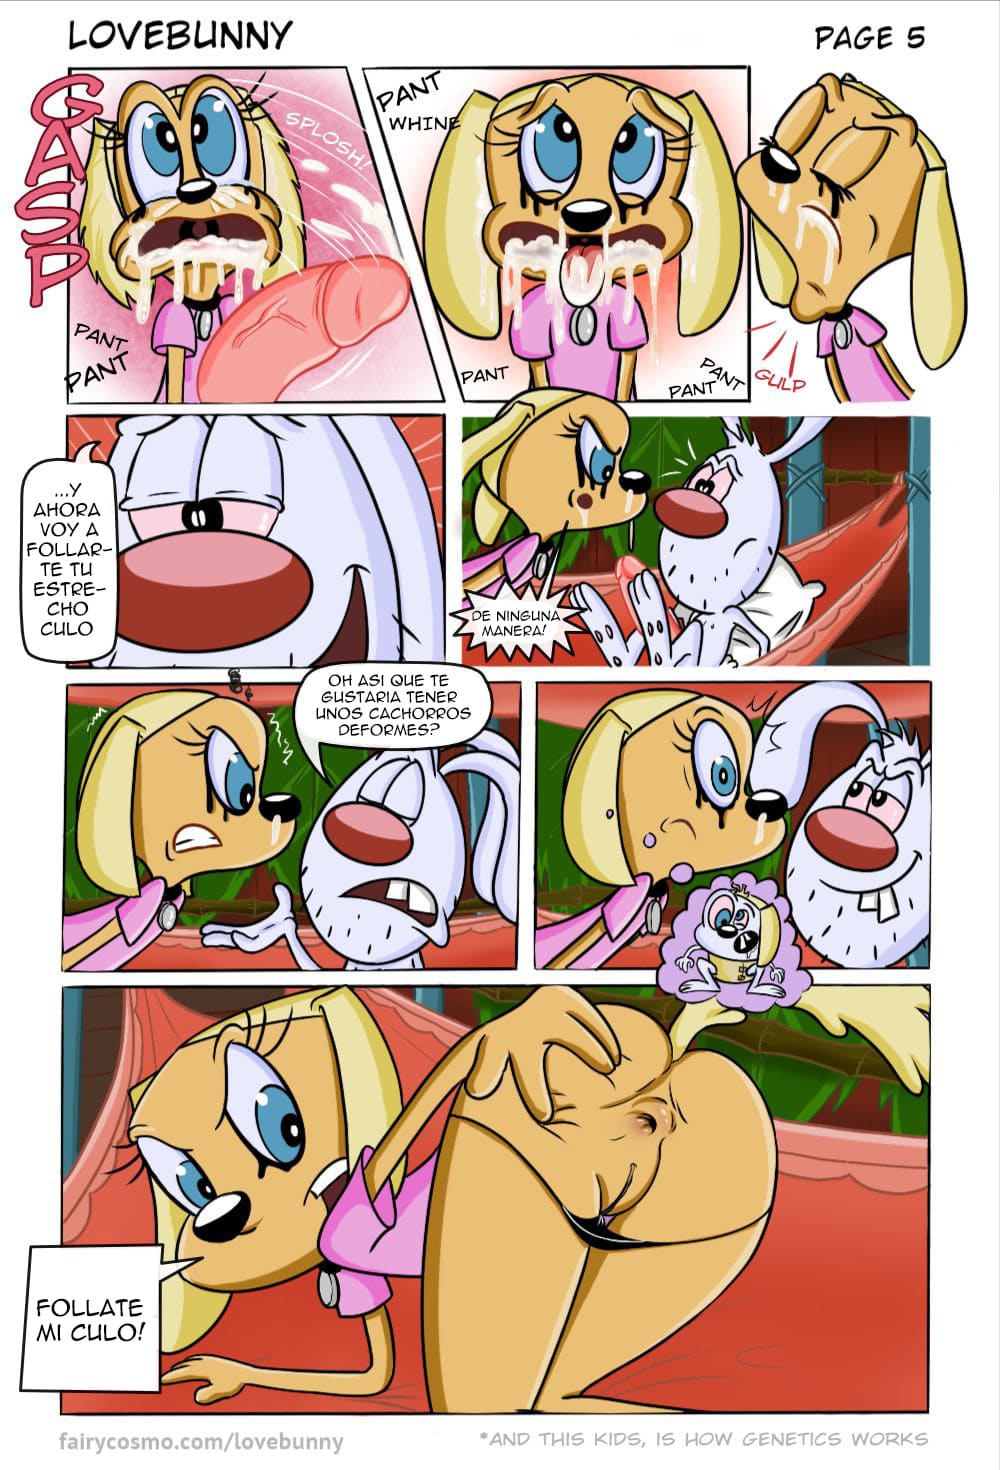 Love Bunny – Brandy and Mr Whiskers - e057e0eca30f4ccc2dcb21a44fc5b34c